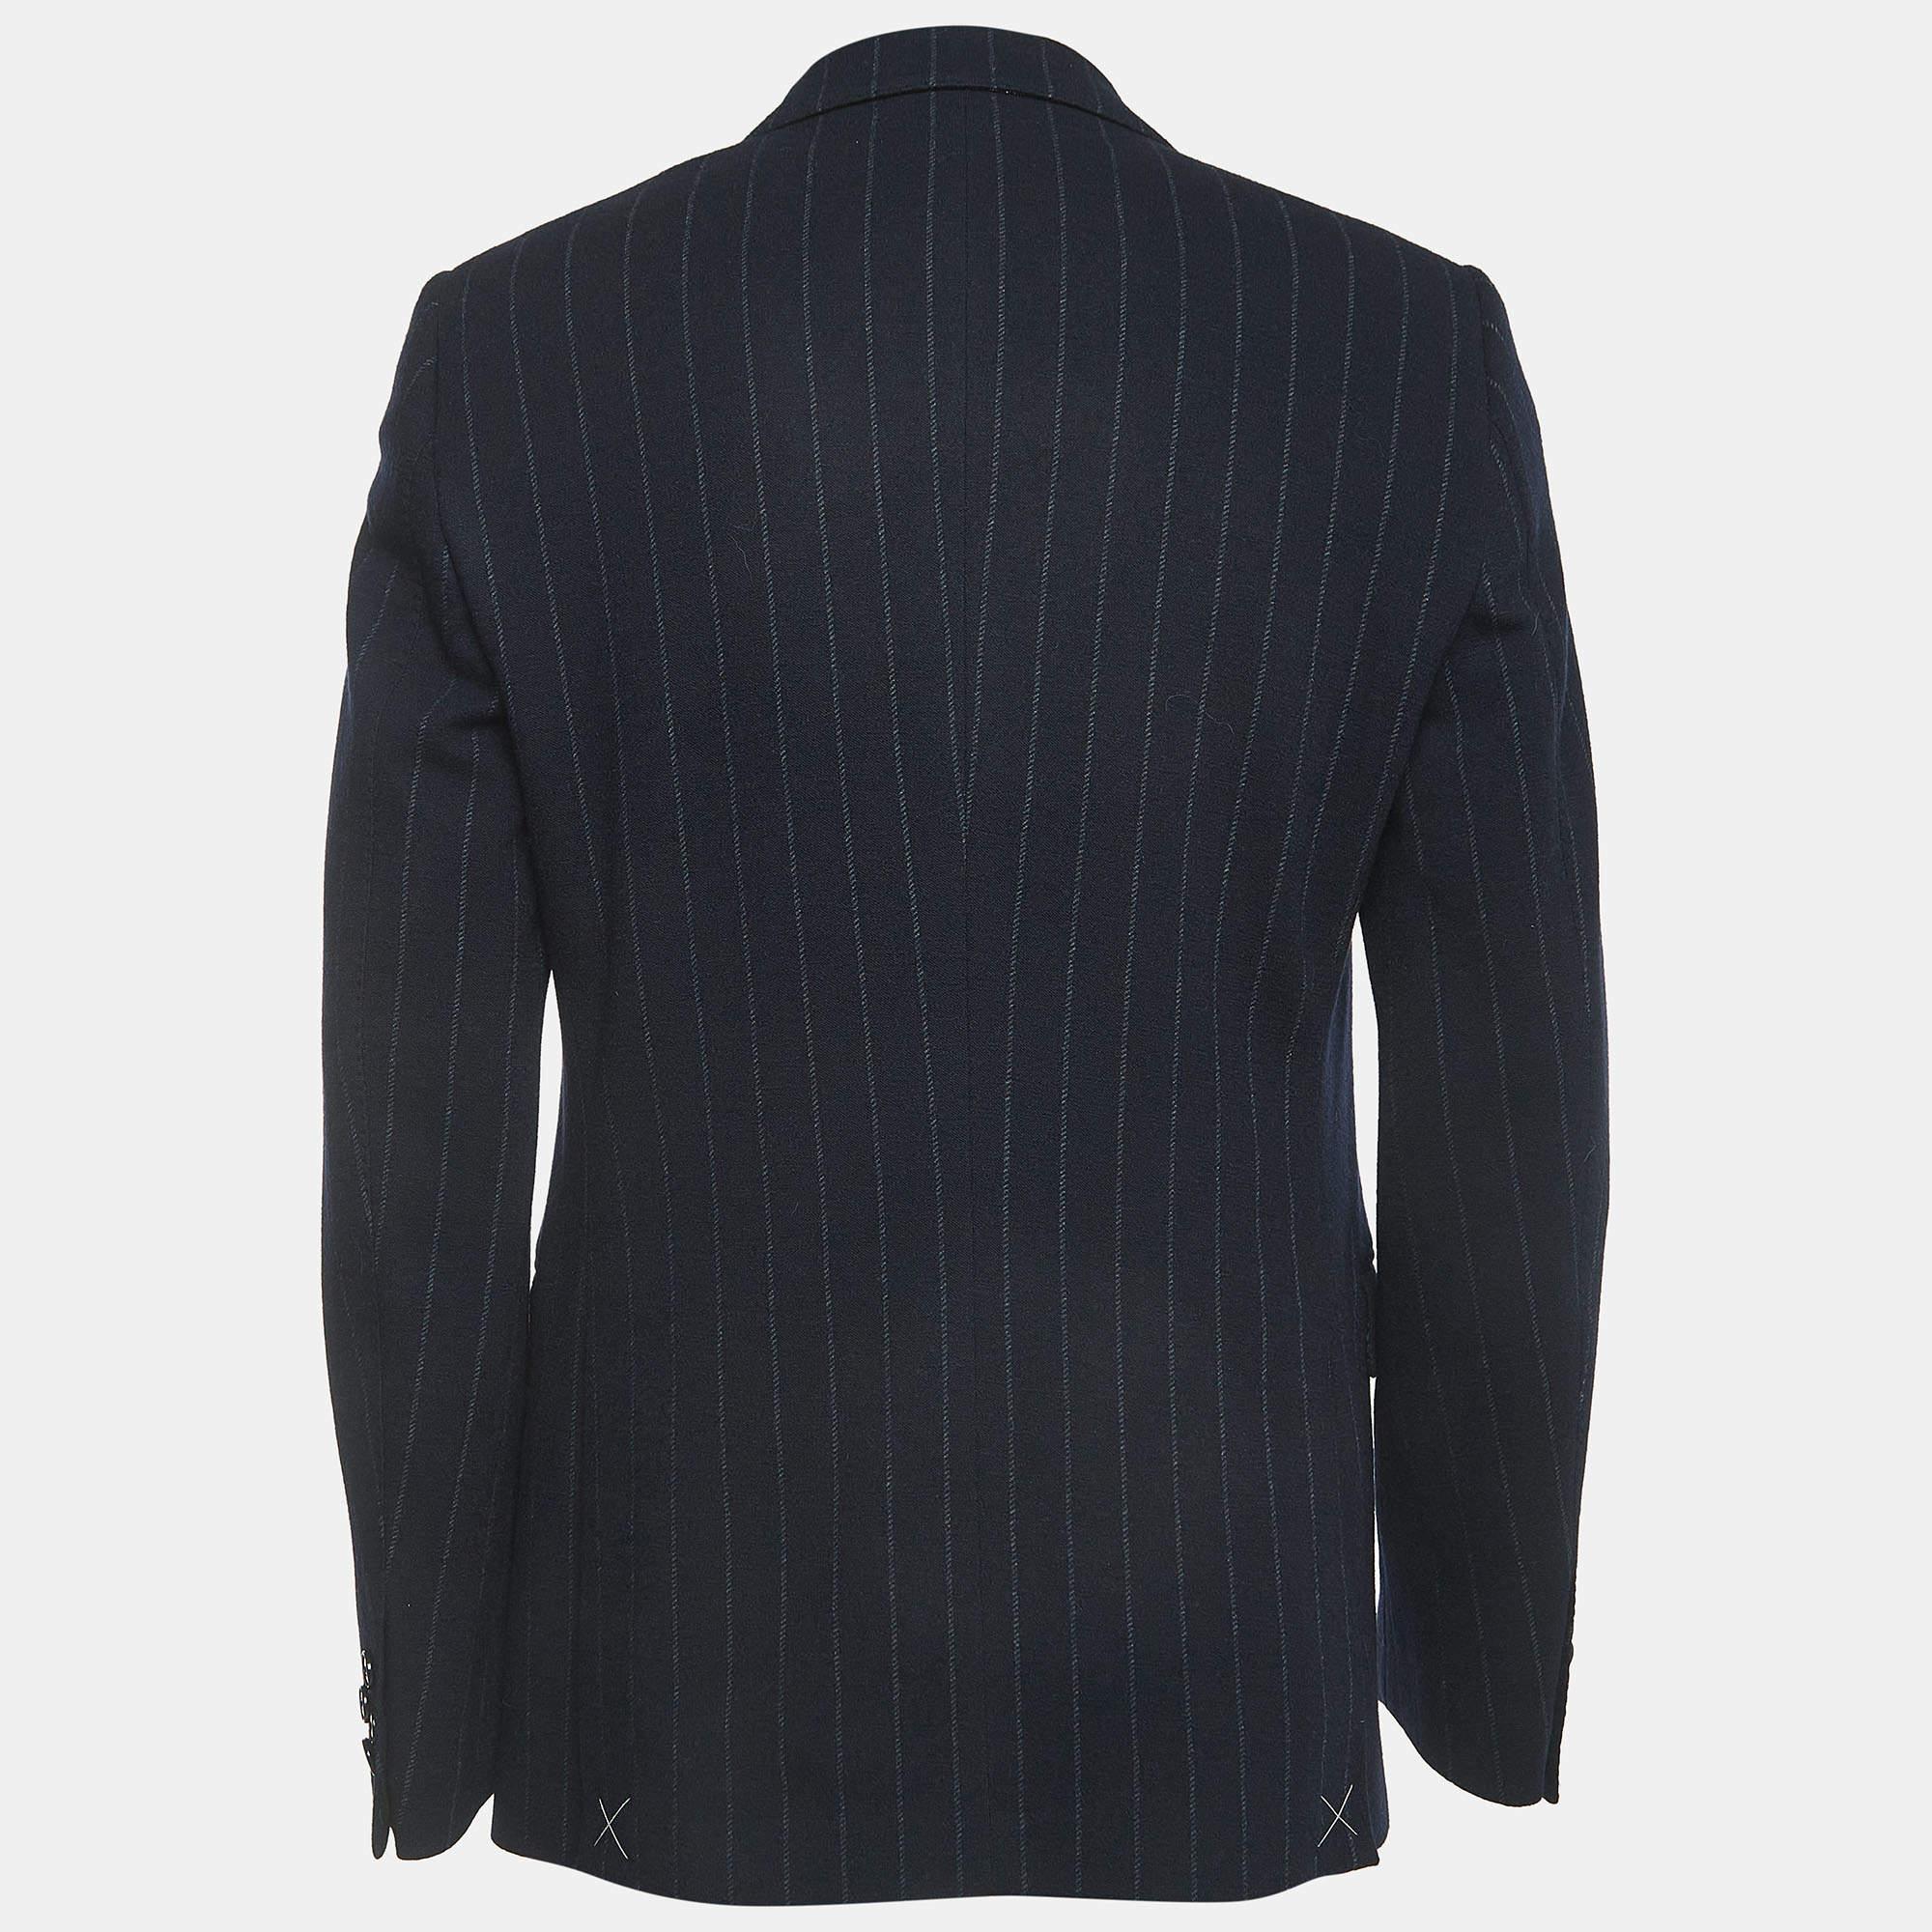 Etro Navy Blue Striped Patterned Wool Blend Double Breasted Blazer XL 1